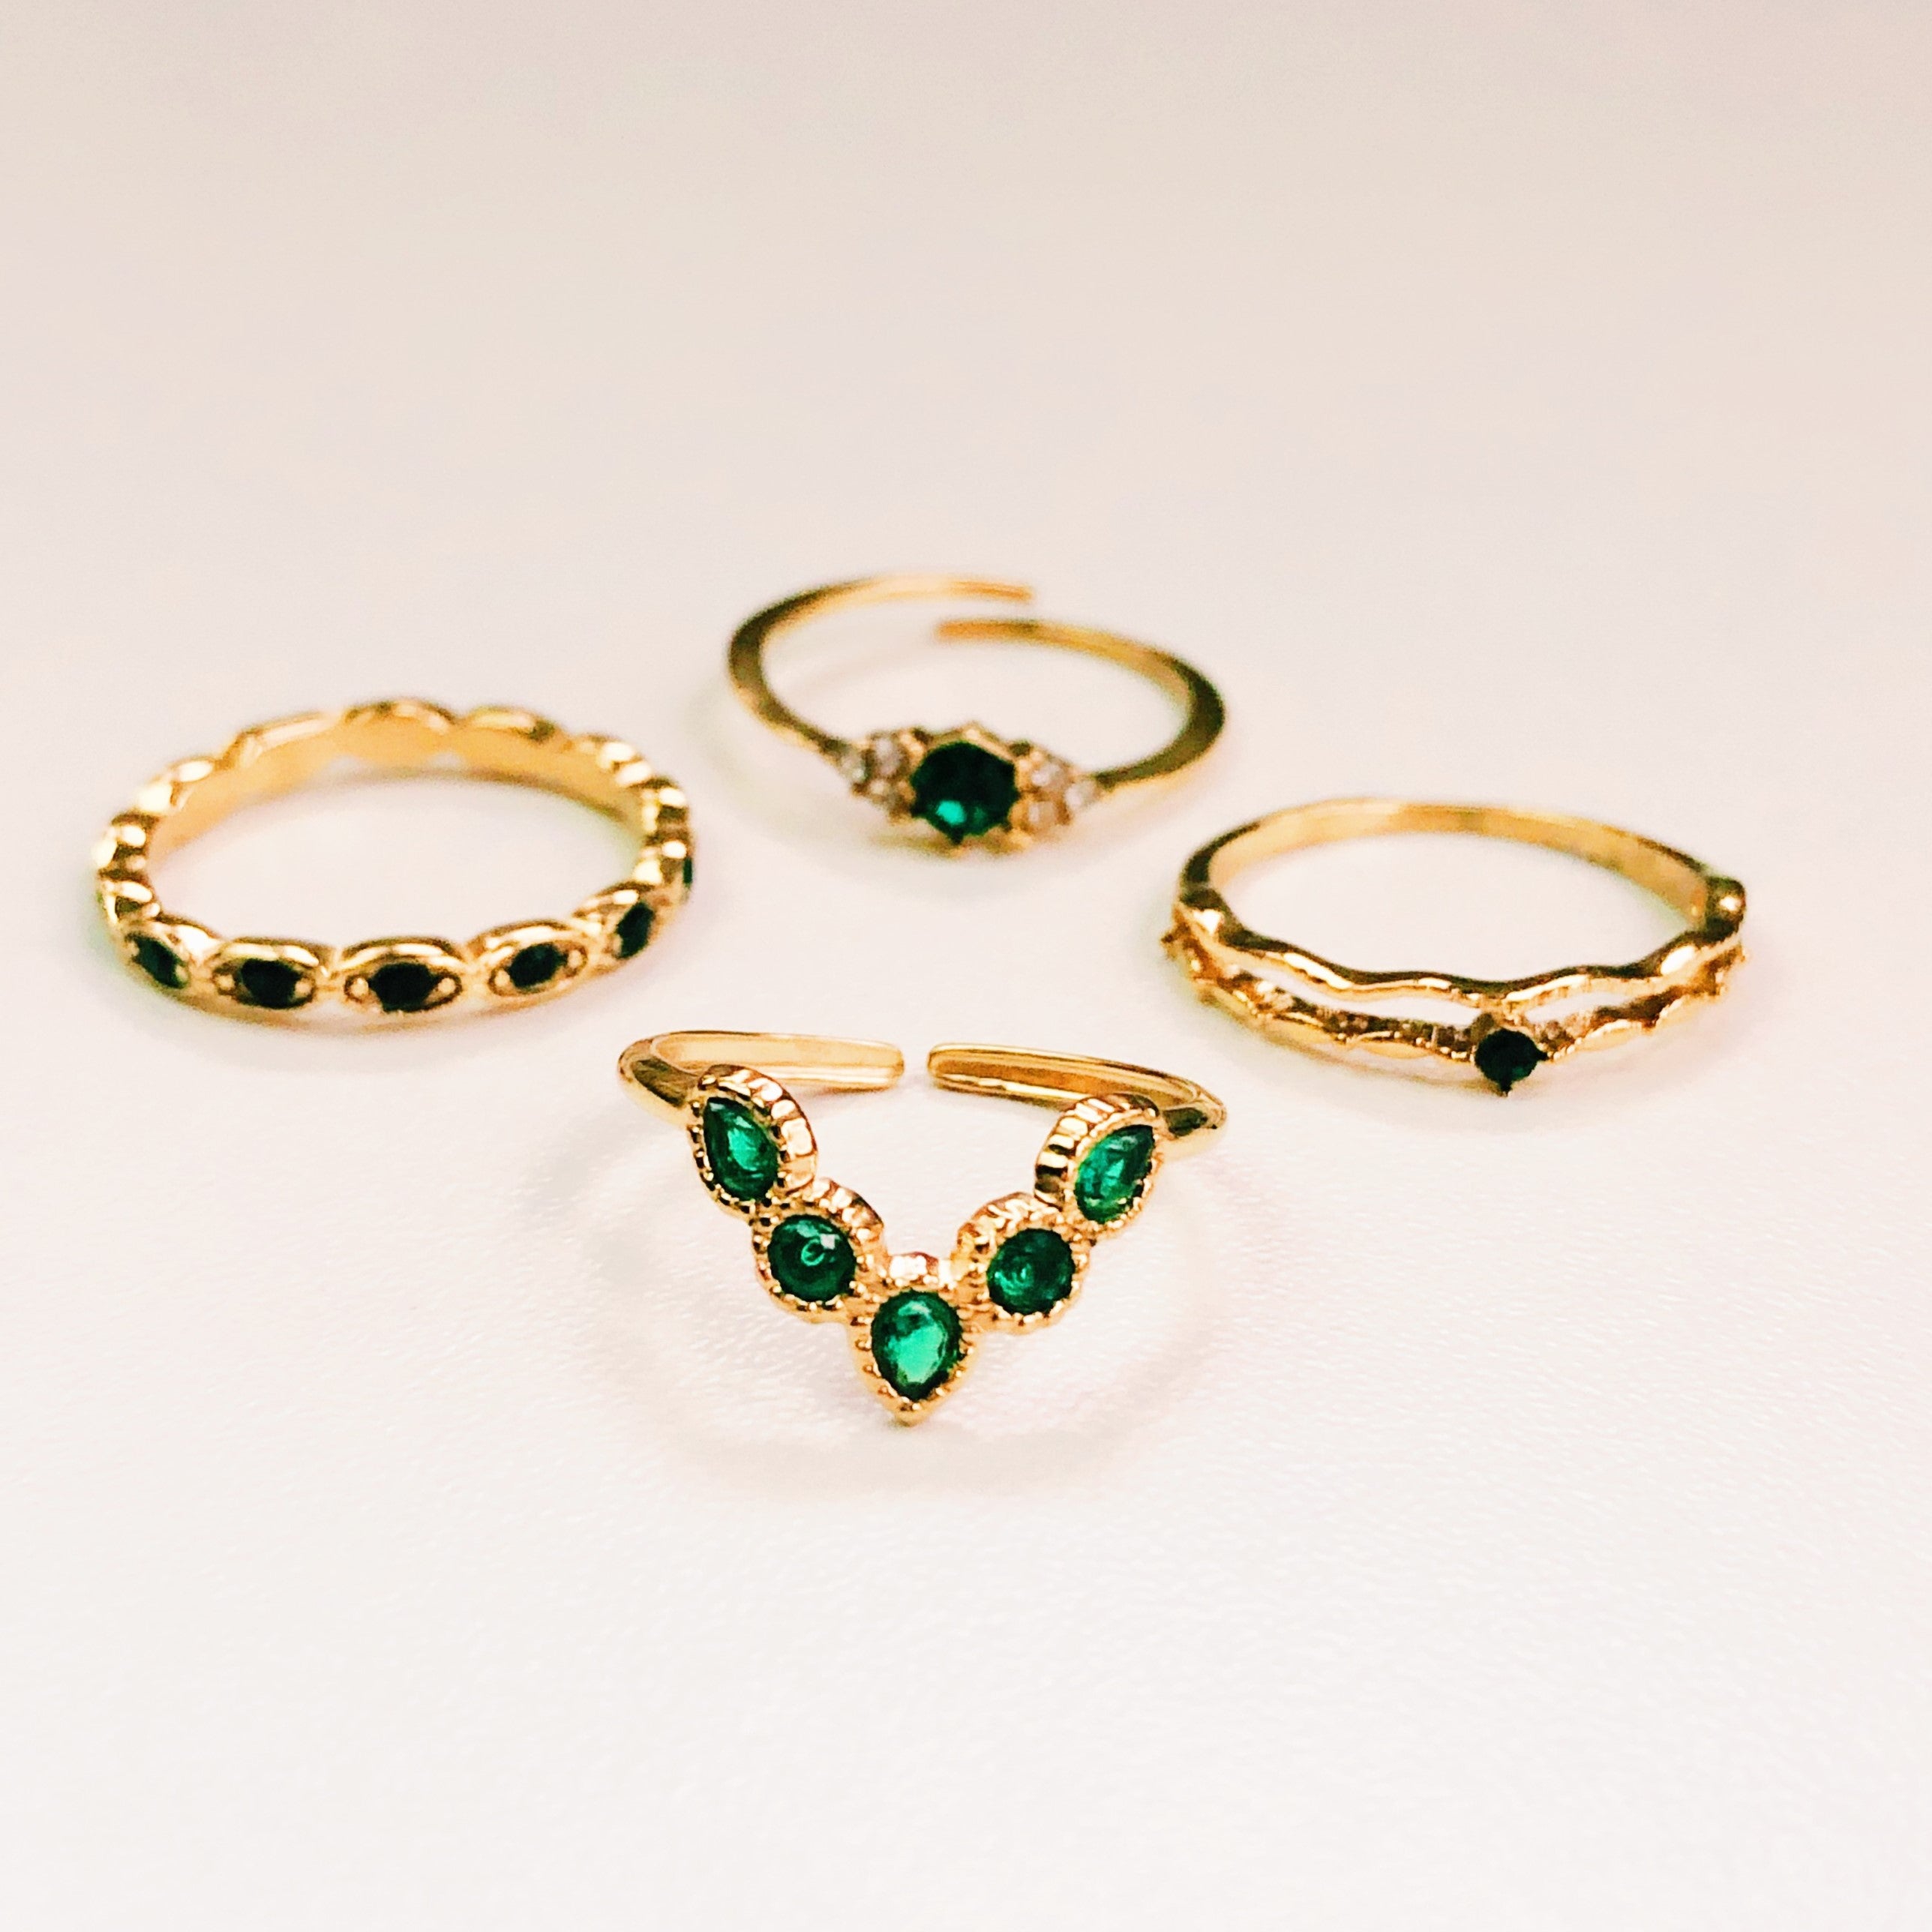 Ring salome green